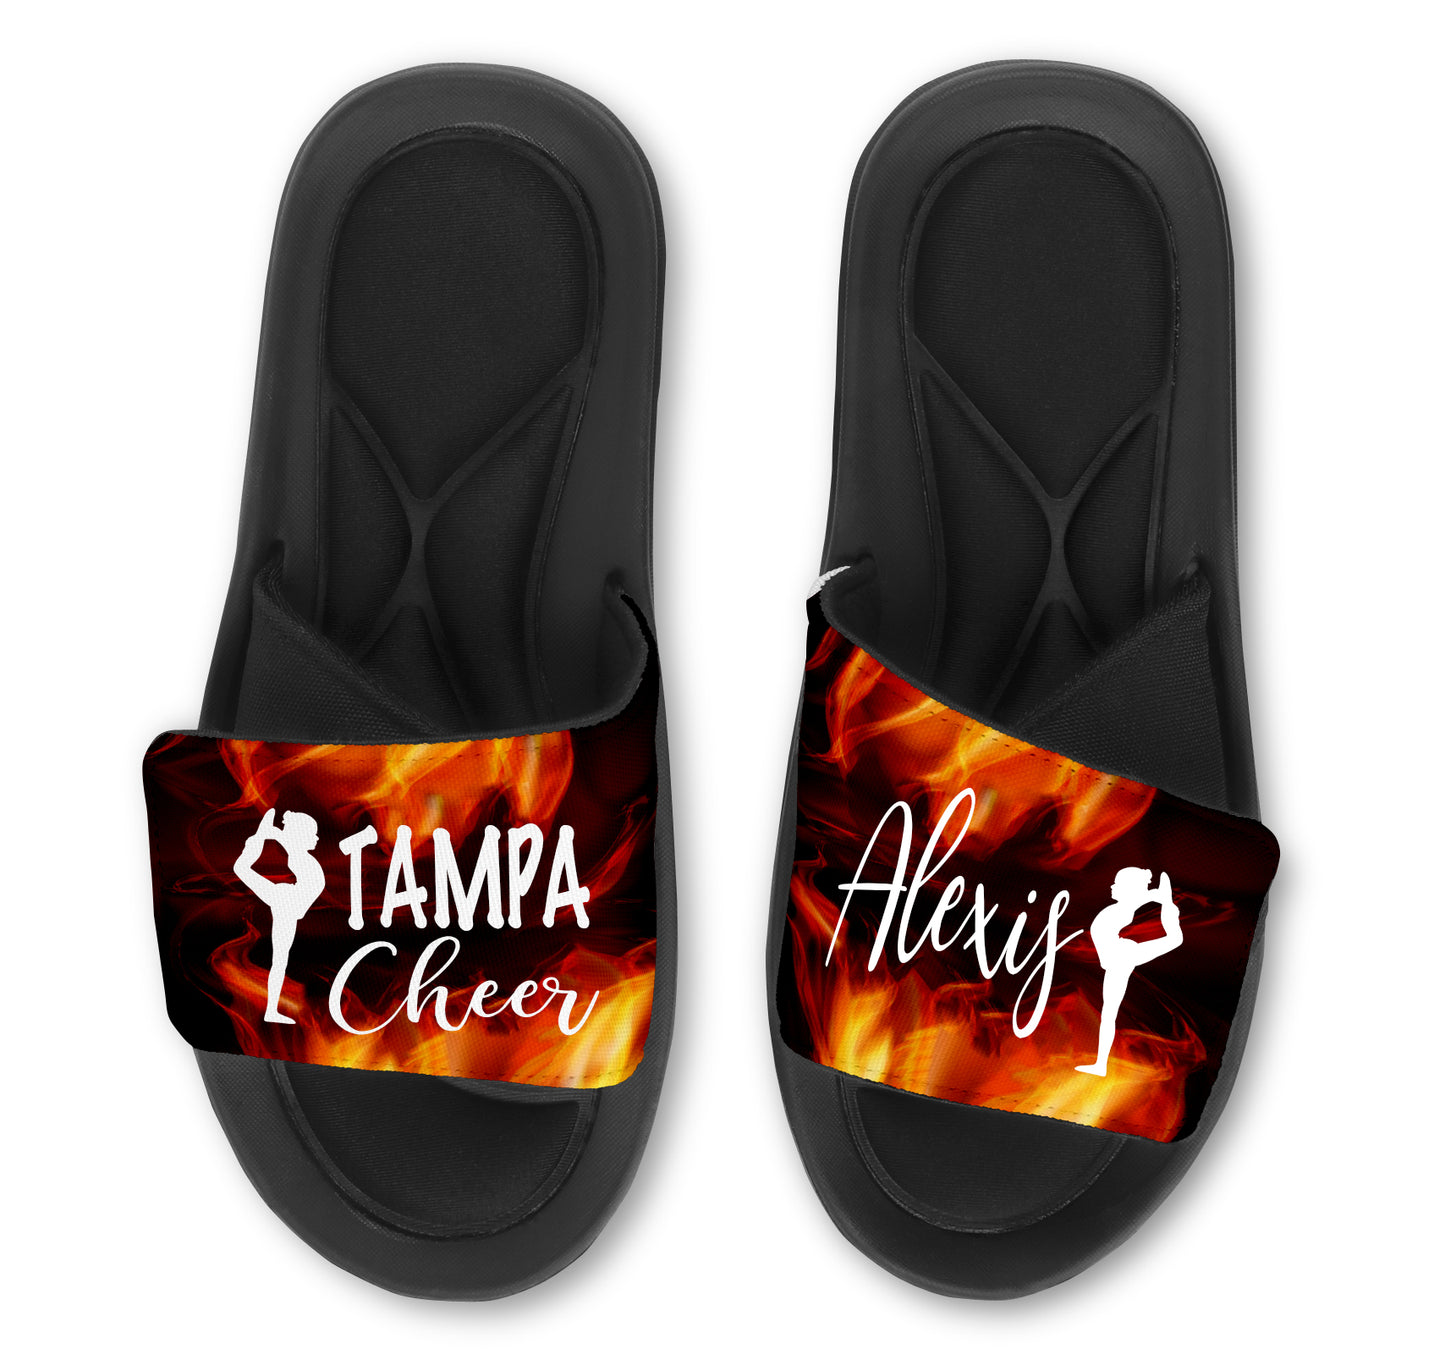 Custom Dance Slides with Flames Background Personalized with Any Text